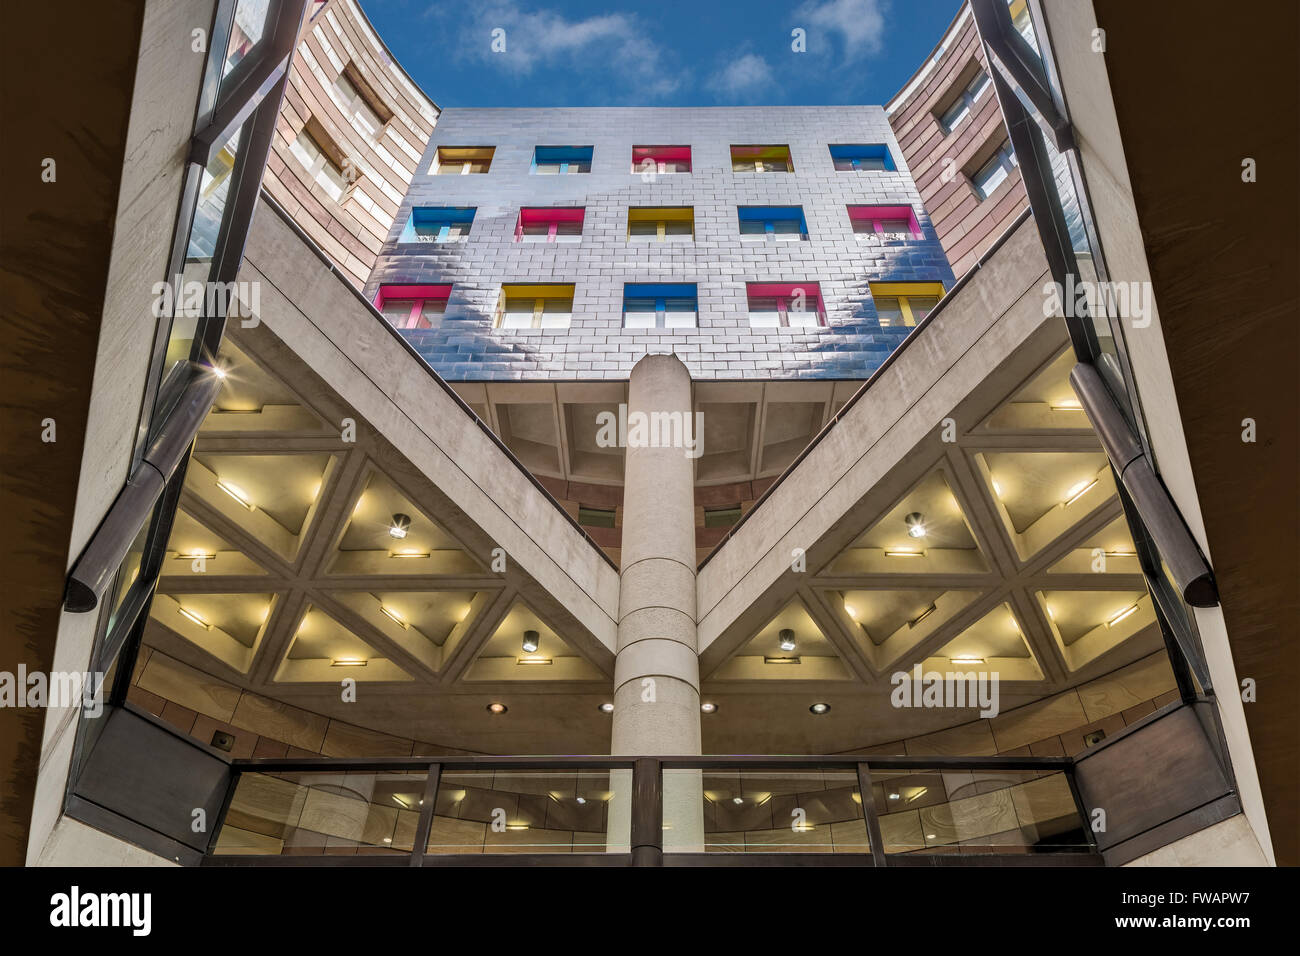 View looking up of the inner courtyard at number 1 Poultry in the City of London Stock Photo